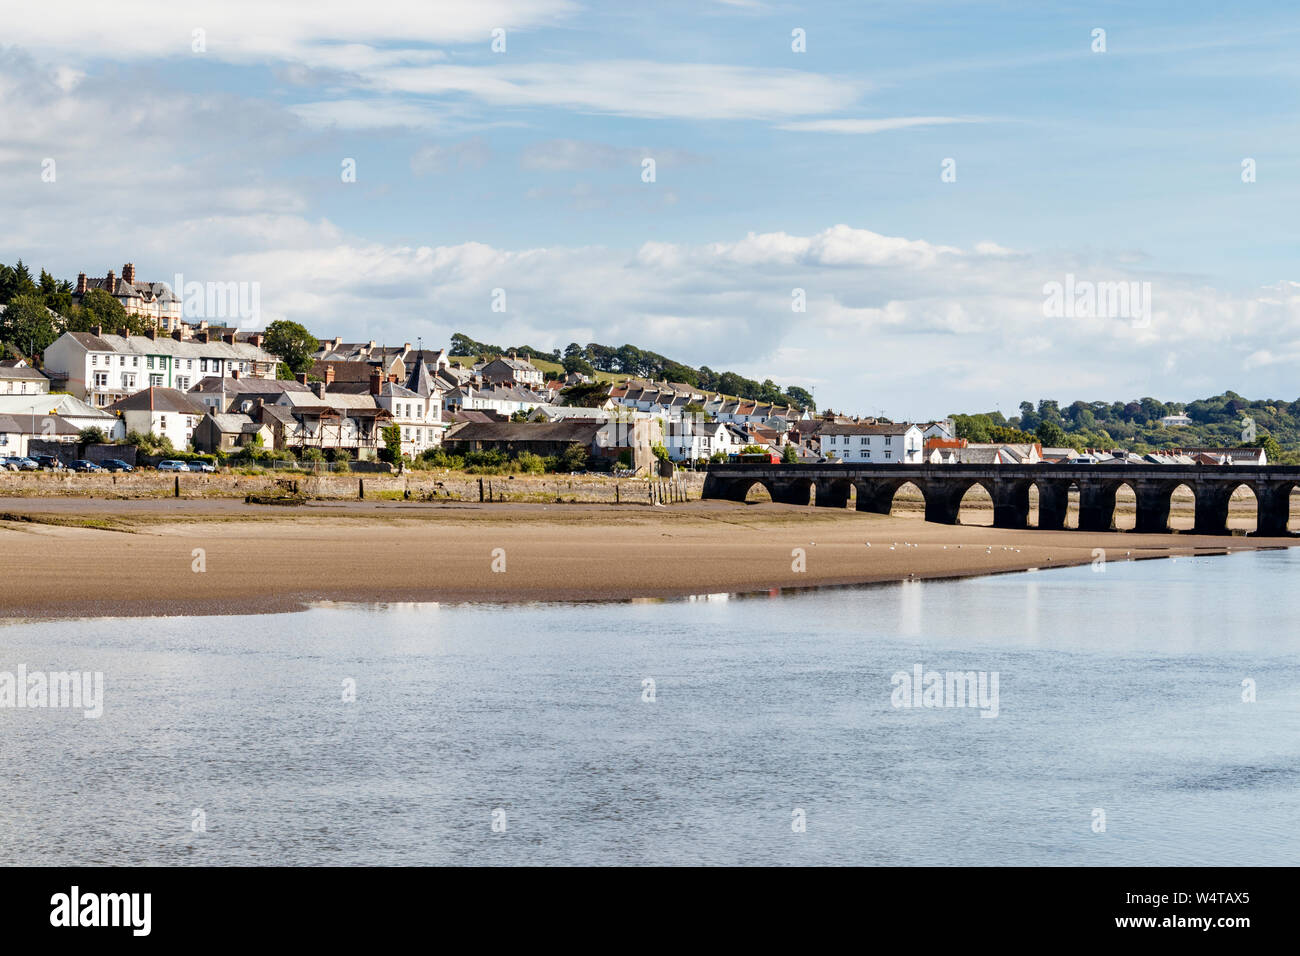 View across the River Torridge to East The Water, Old Bideford Bridge on the right, from the Quay, Bideford, Devon, UK Stock Photo